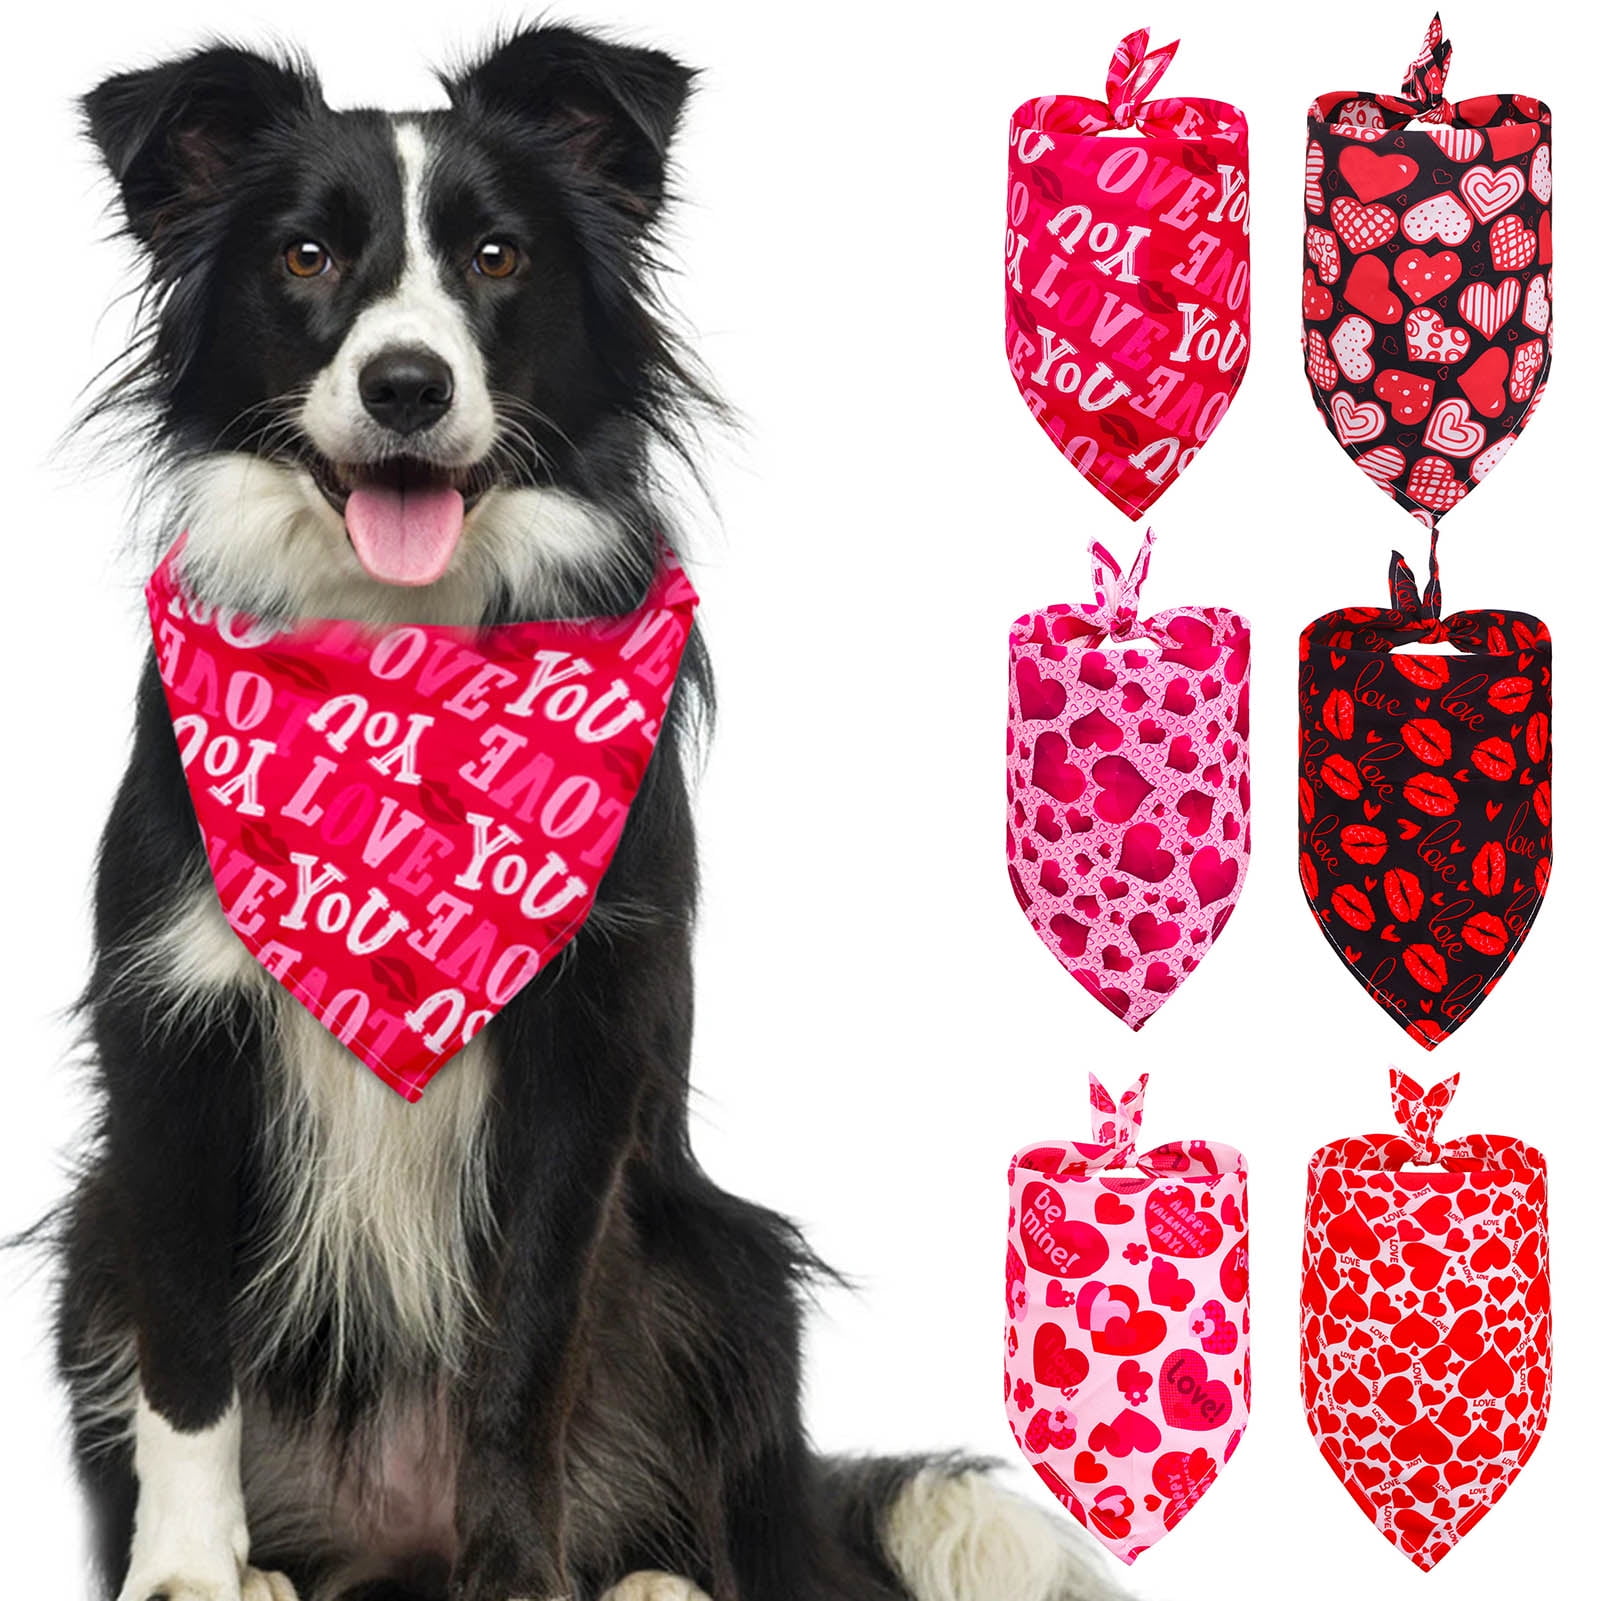 Yirtree Valentine\'s Day Dog Bandana Triangle Bib Scarf with Lip Heart and  Love Patterns Reversible Pet Neckerchief Accessories for Dogs Cats Pets